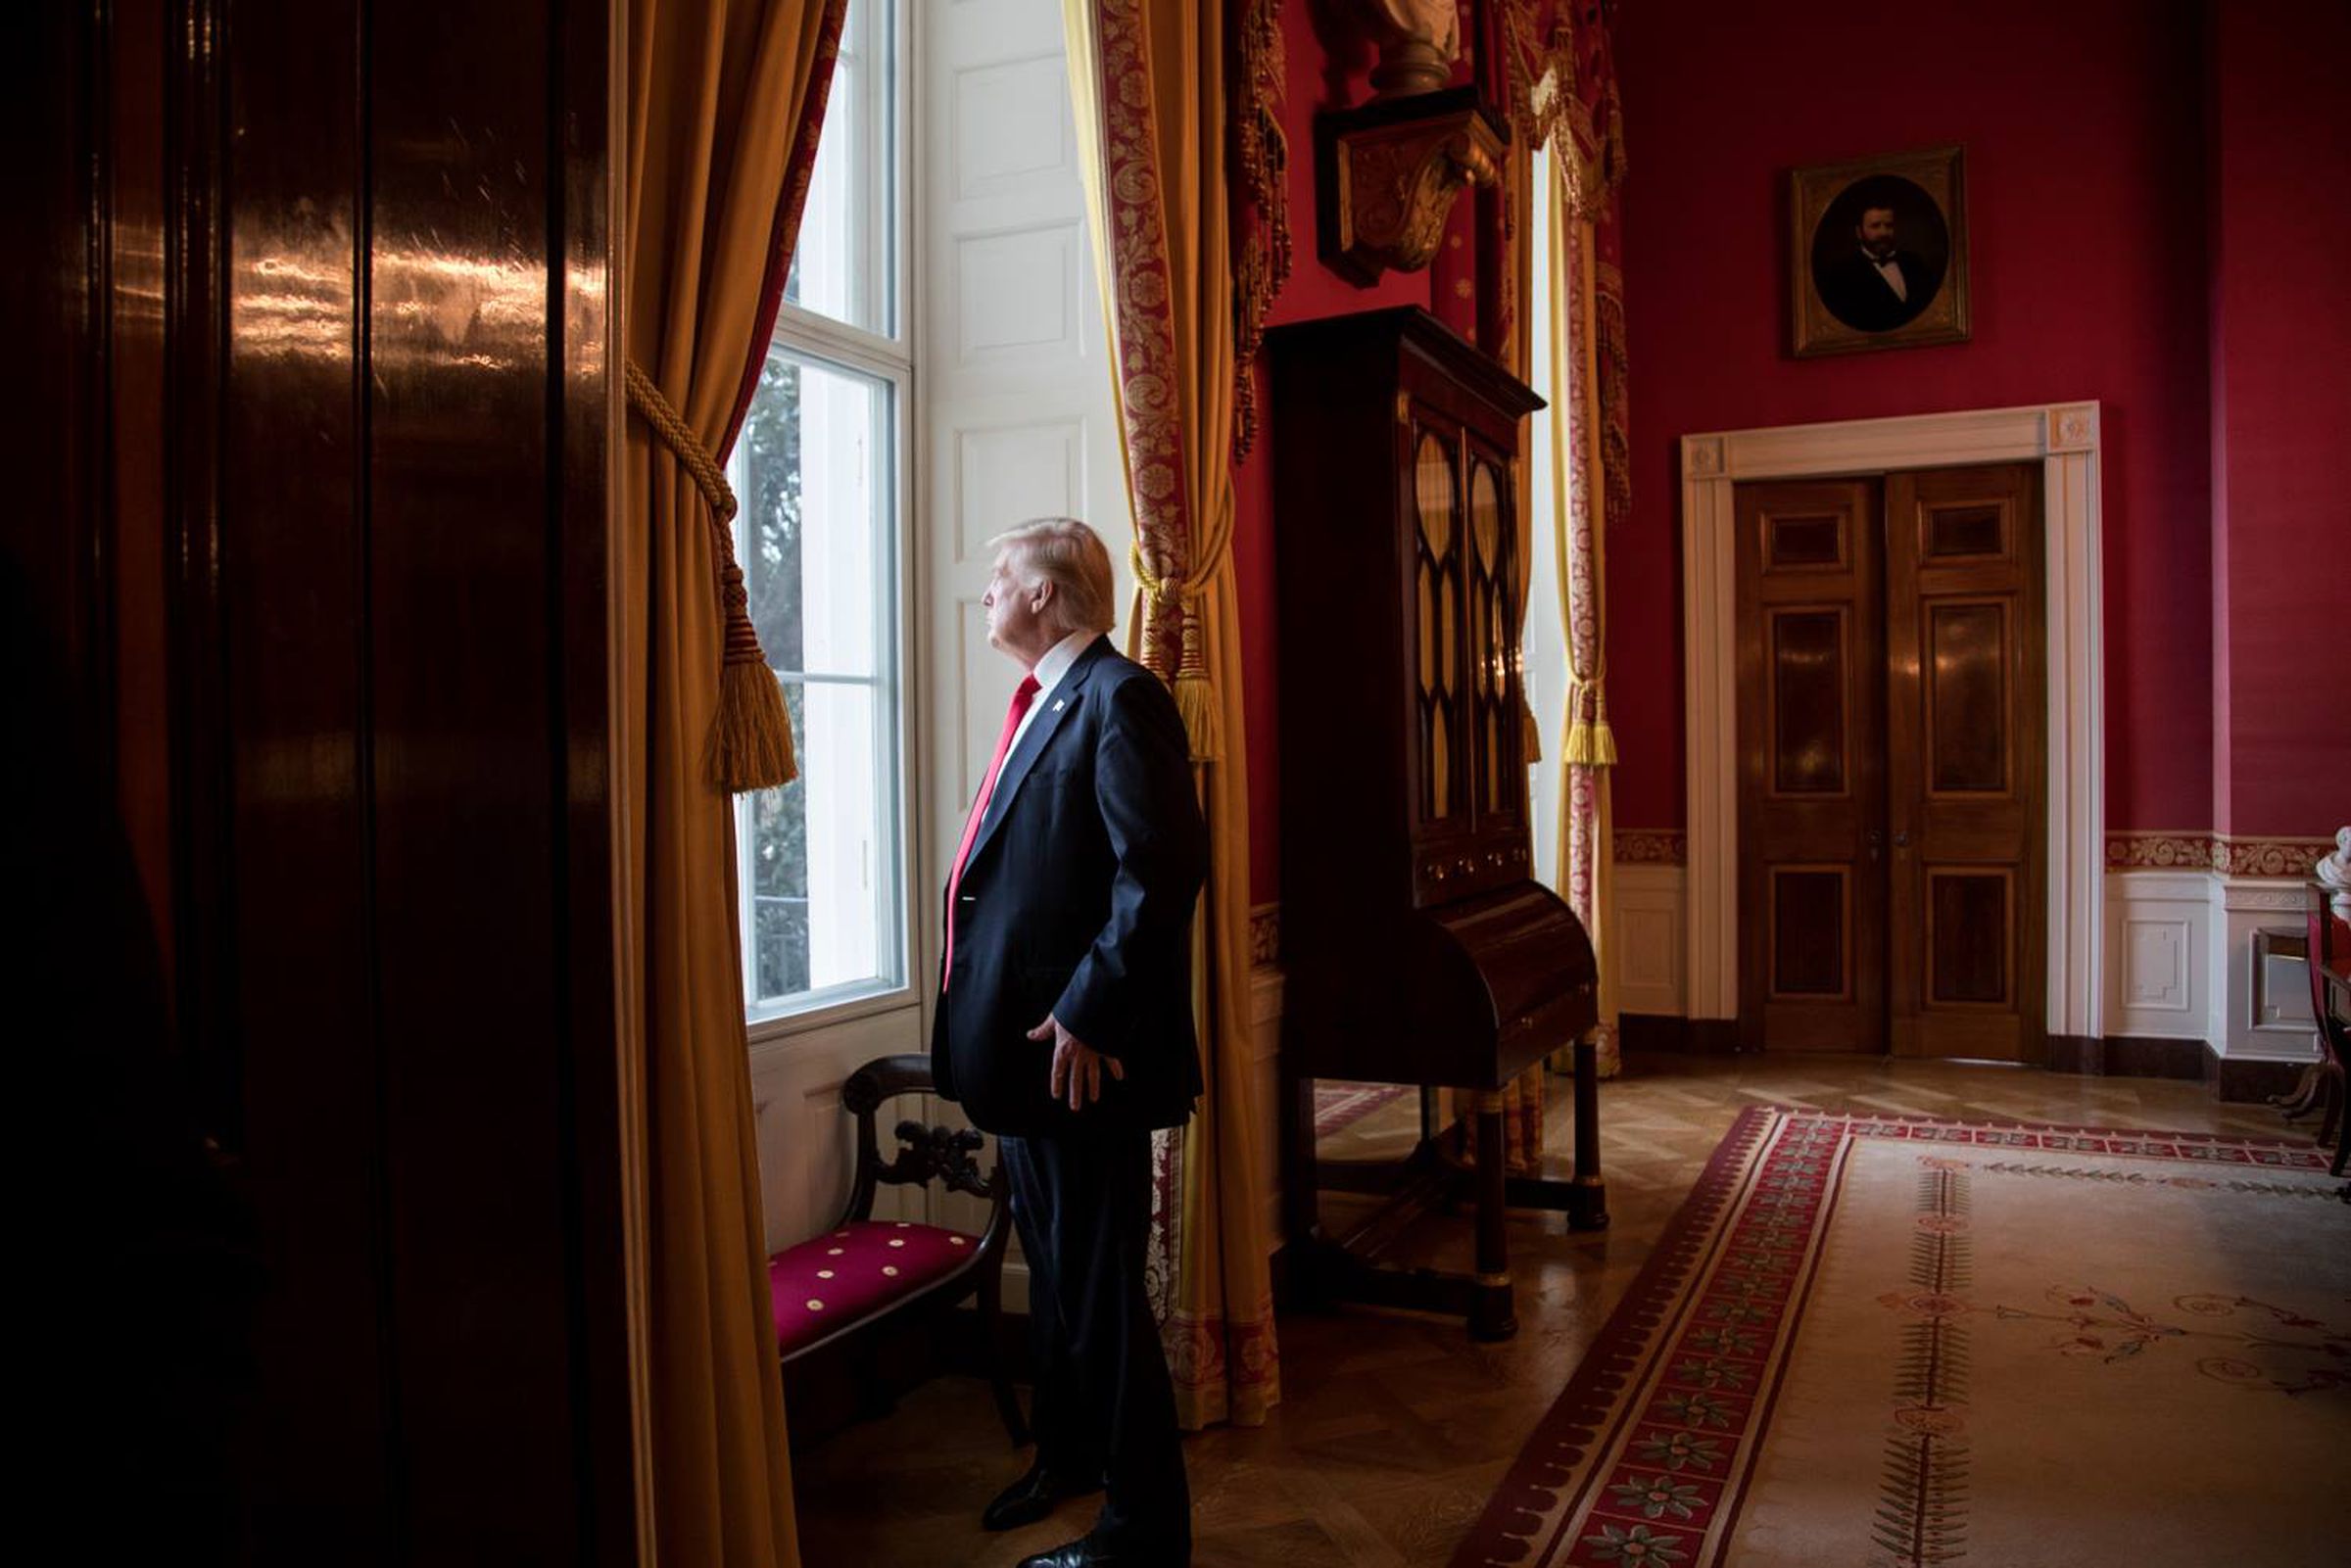 This photo, from Inauguration Day, is one of the few we’ve seen of Trump from behind the scenes of his presidency. 